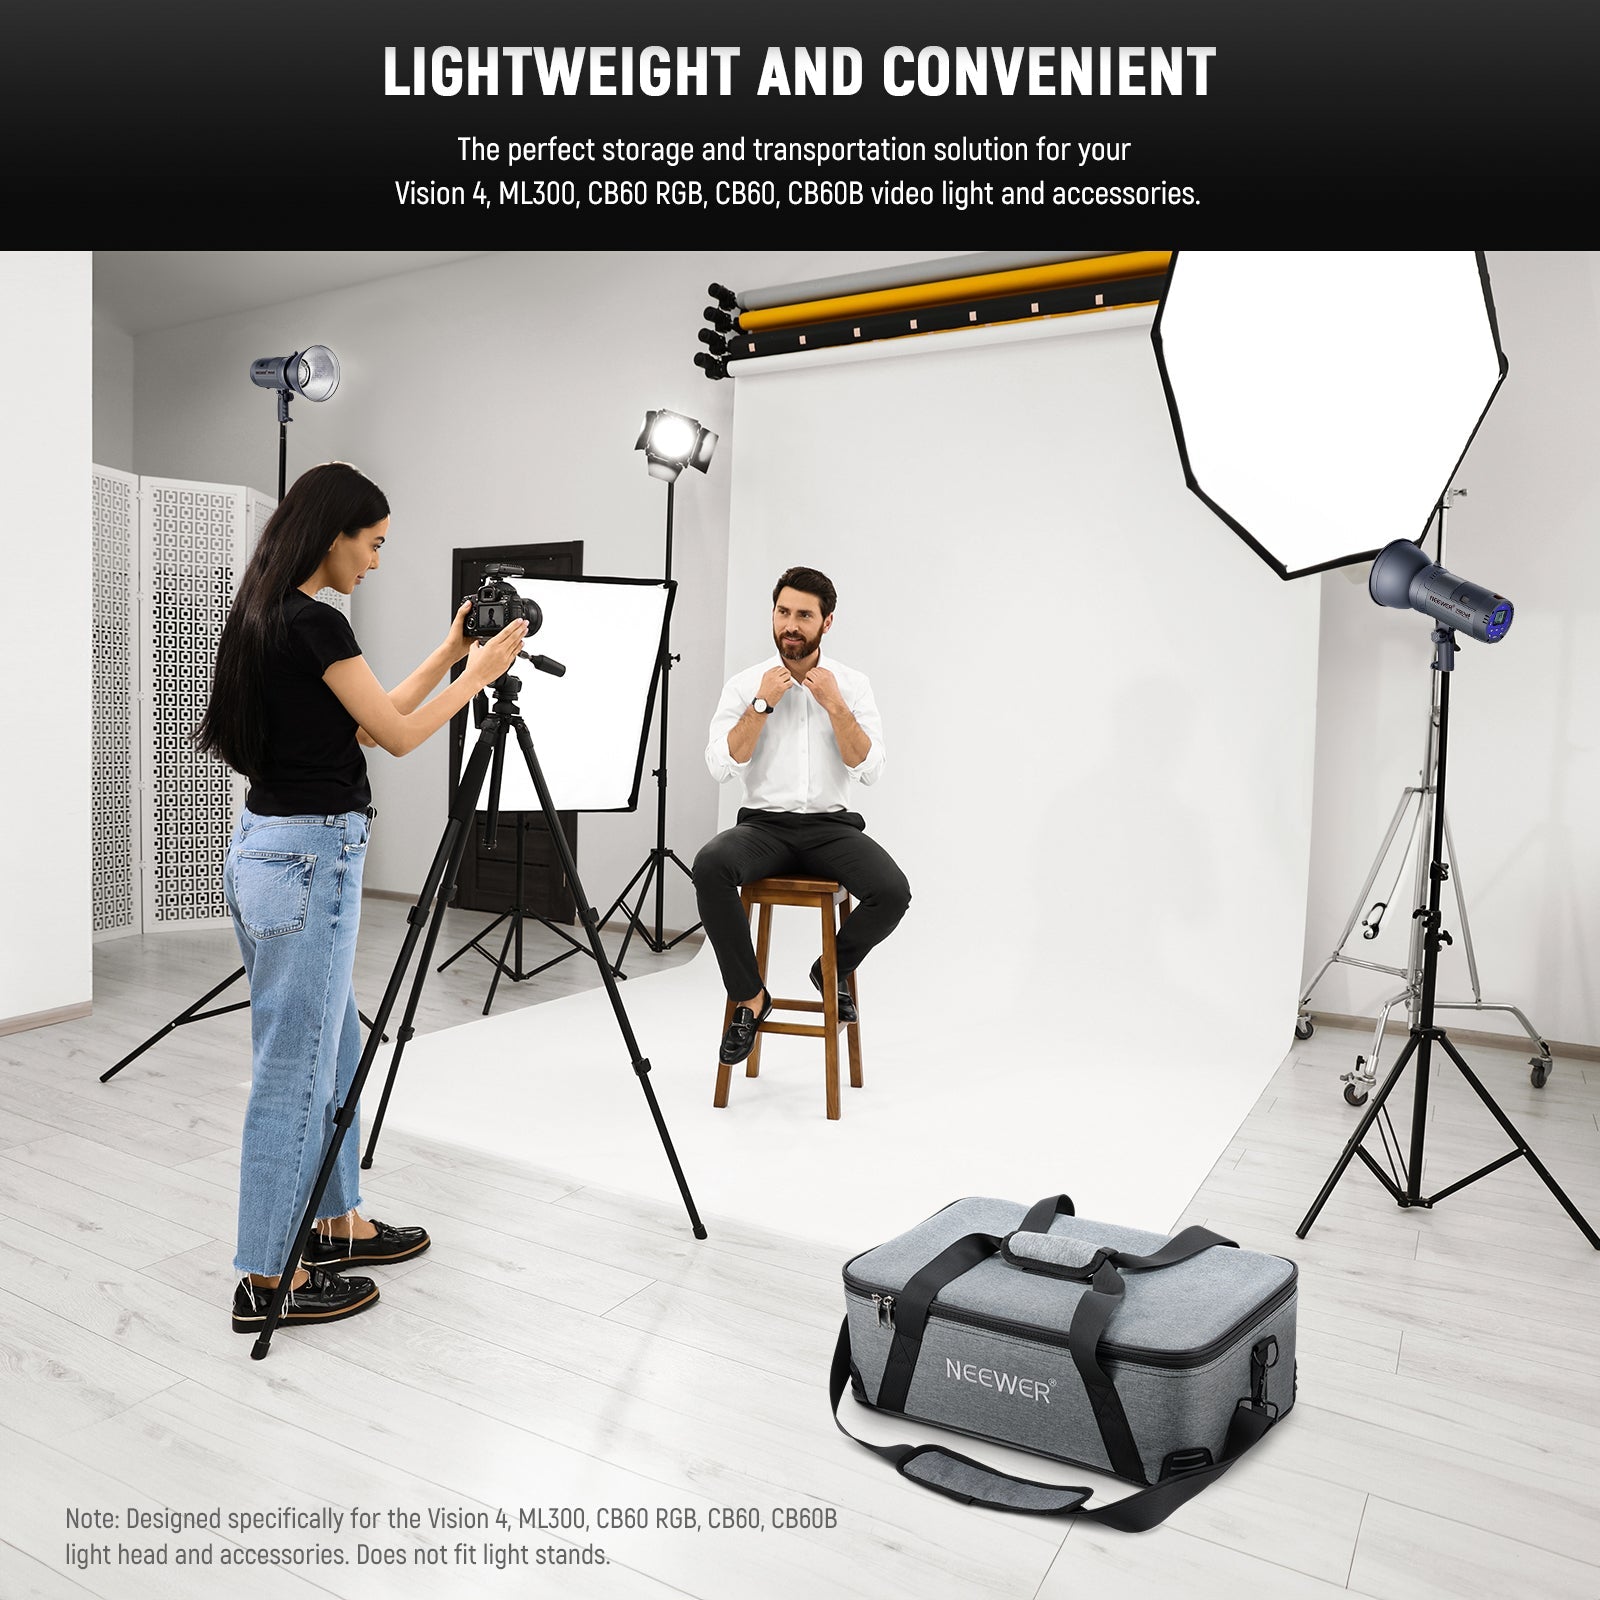 Introducing the Neewer MS150B 130W Bicolor LED Video Light 